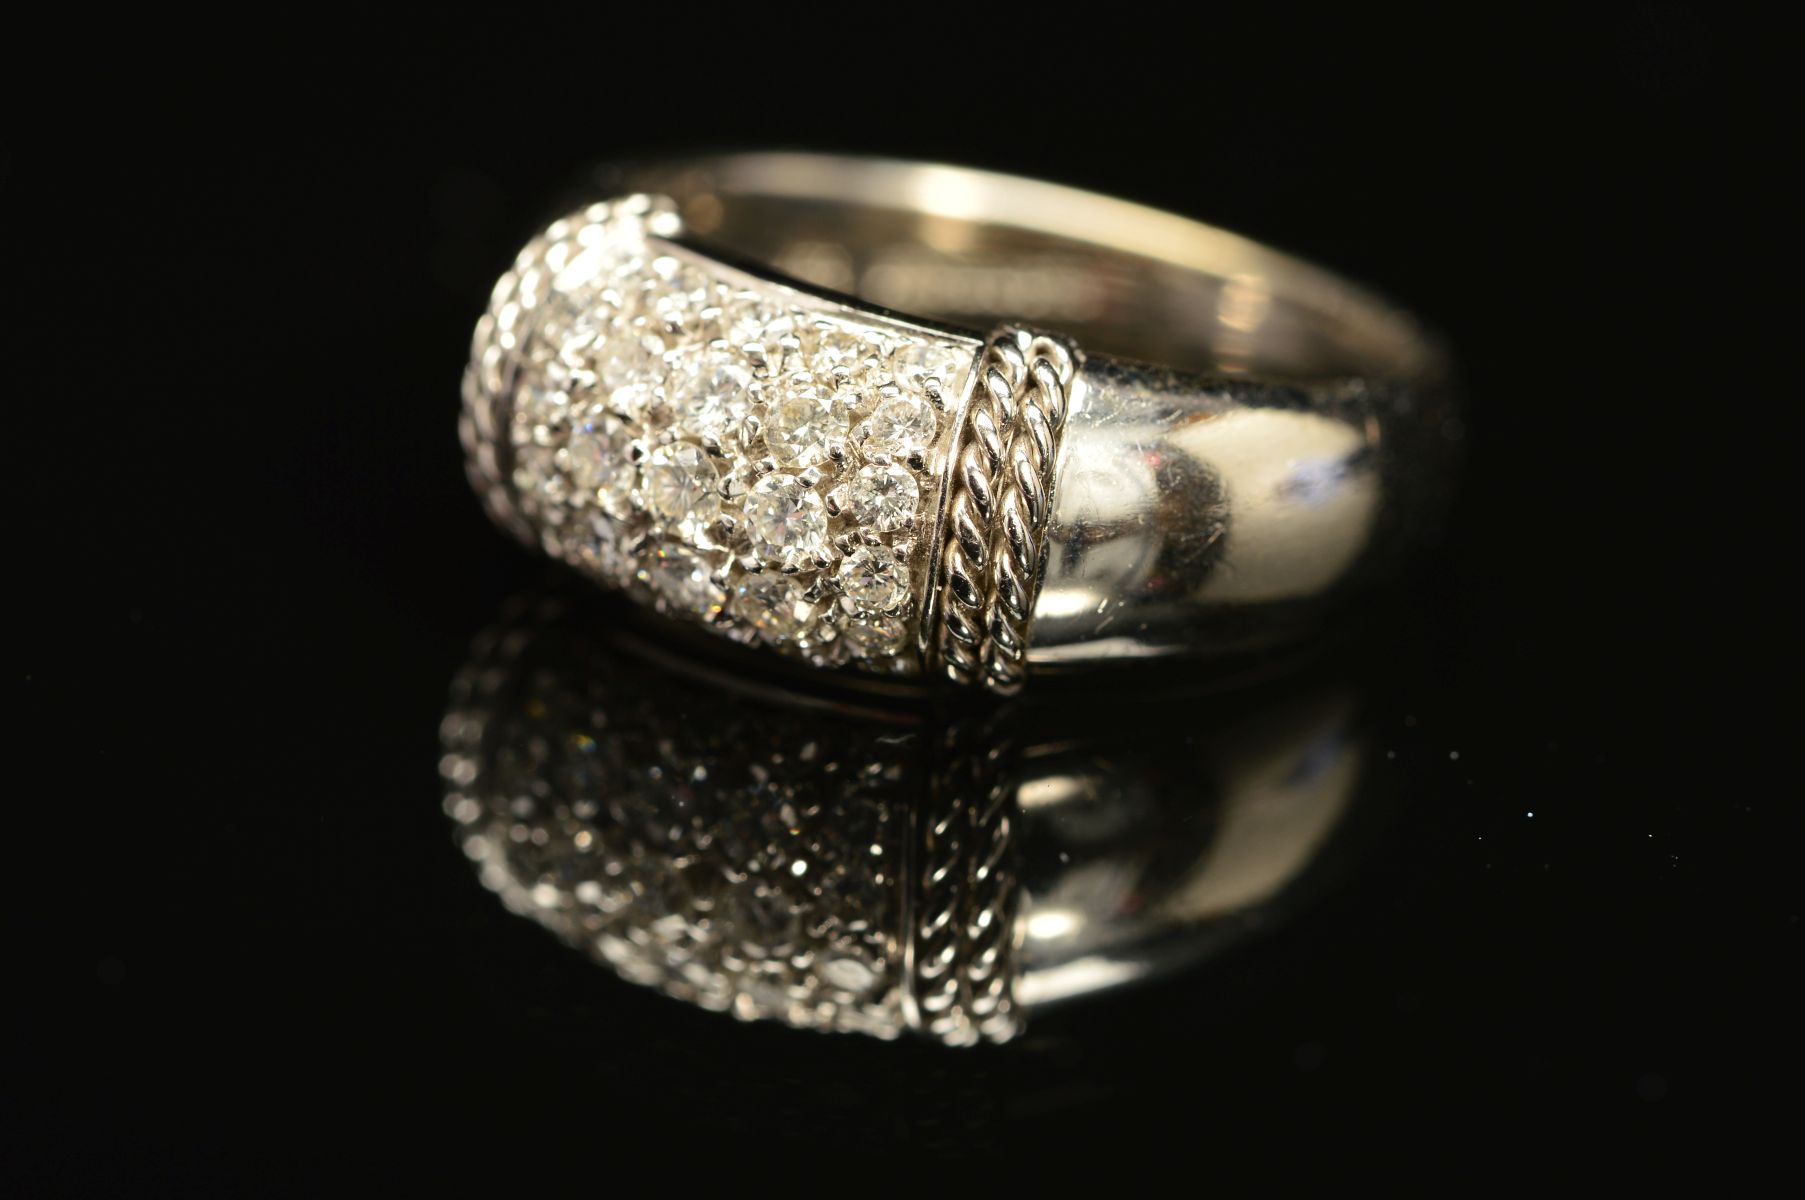 A MODERN PICCHIOTTI 18CT WHITE GOLD AND DIAMOND SET RING, pave diamond set, together with a